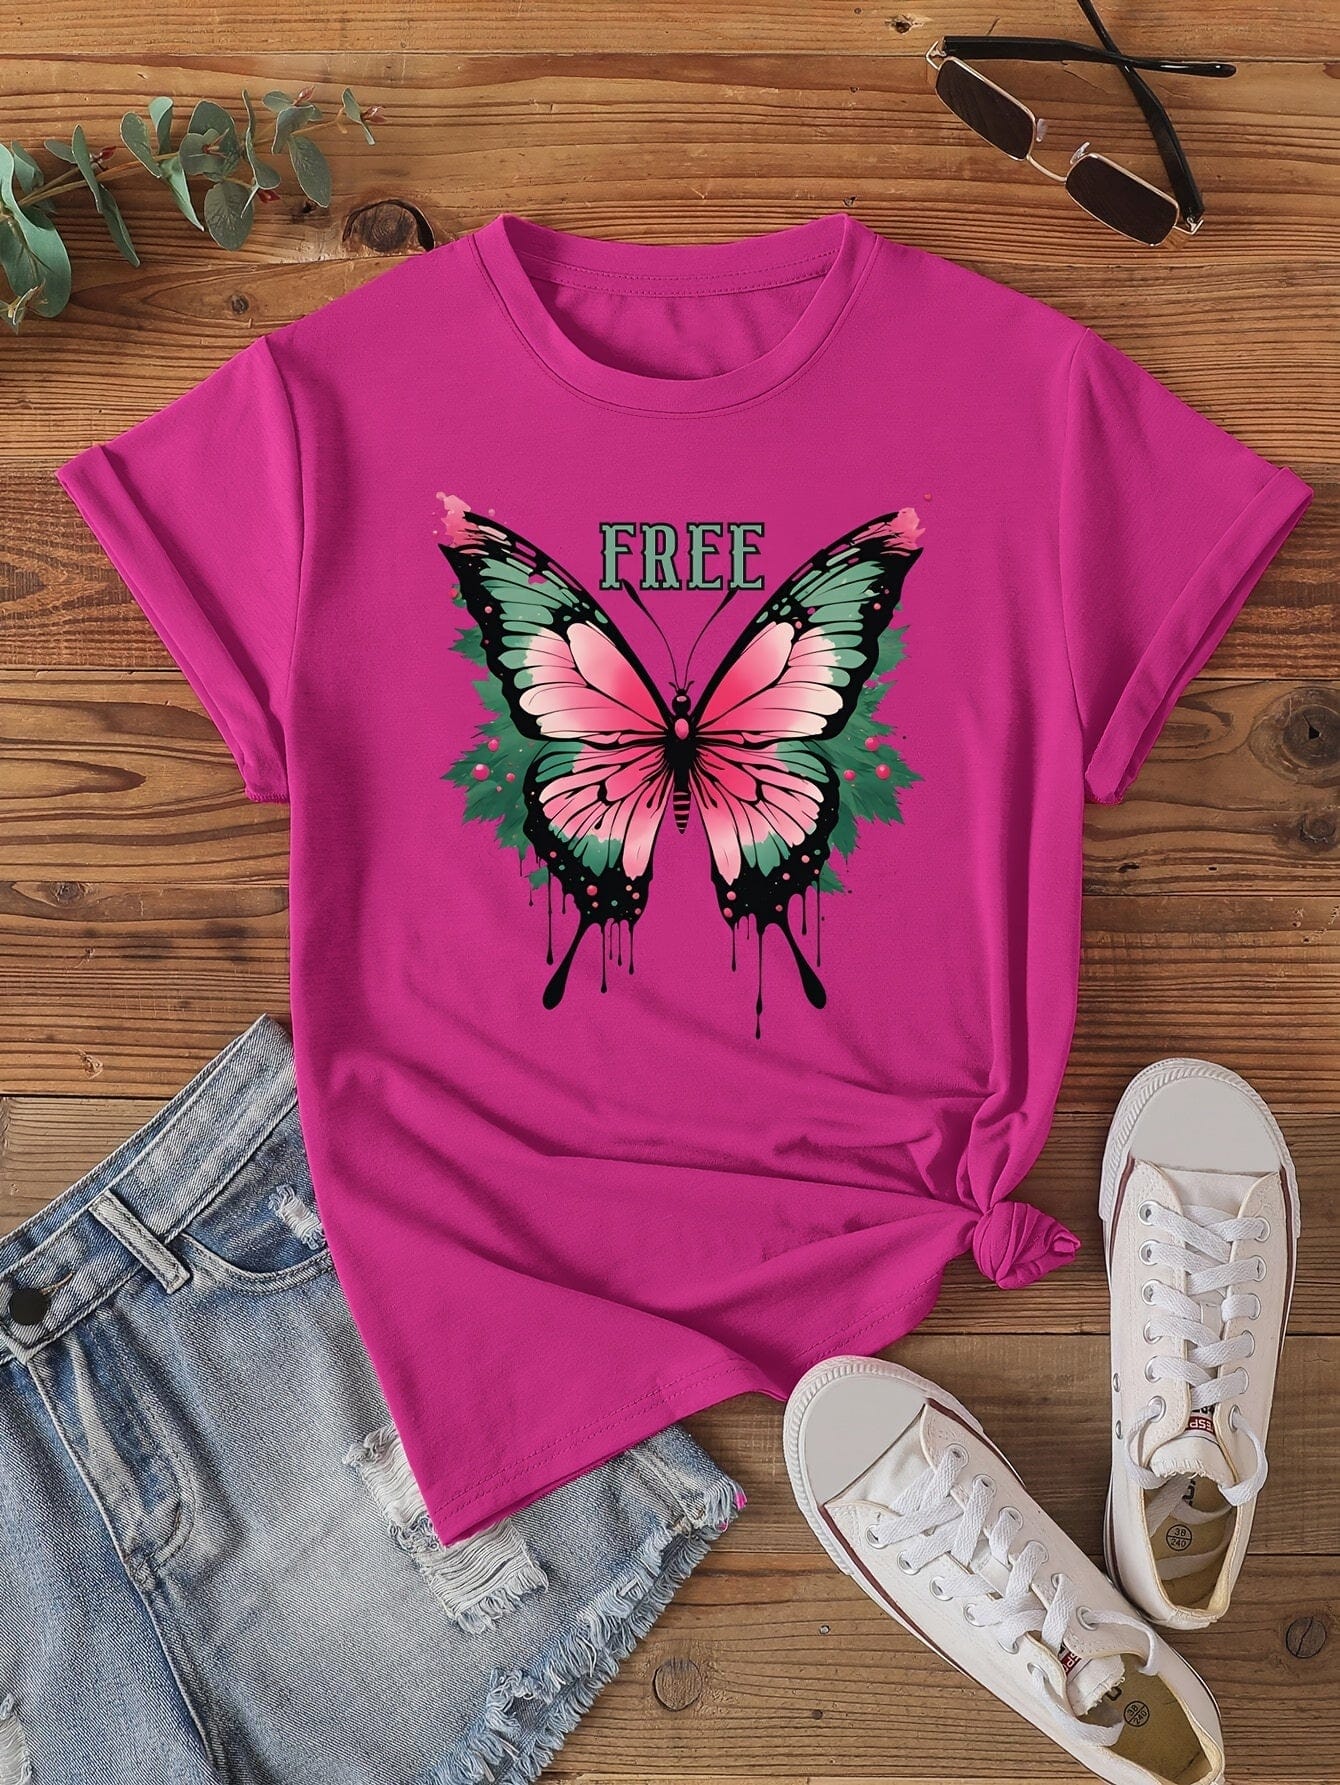 Butterfly & Free Letter Pattern Tee, Stylish Crew Neck Top for Women, Spring & Summer Fashion